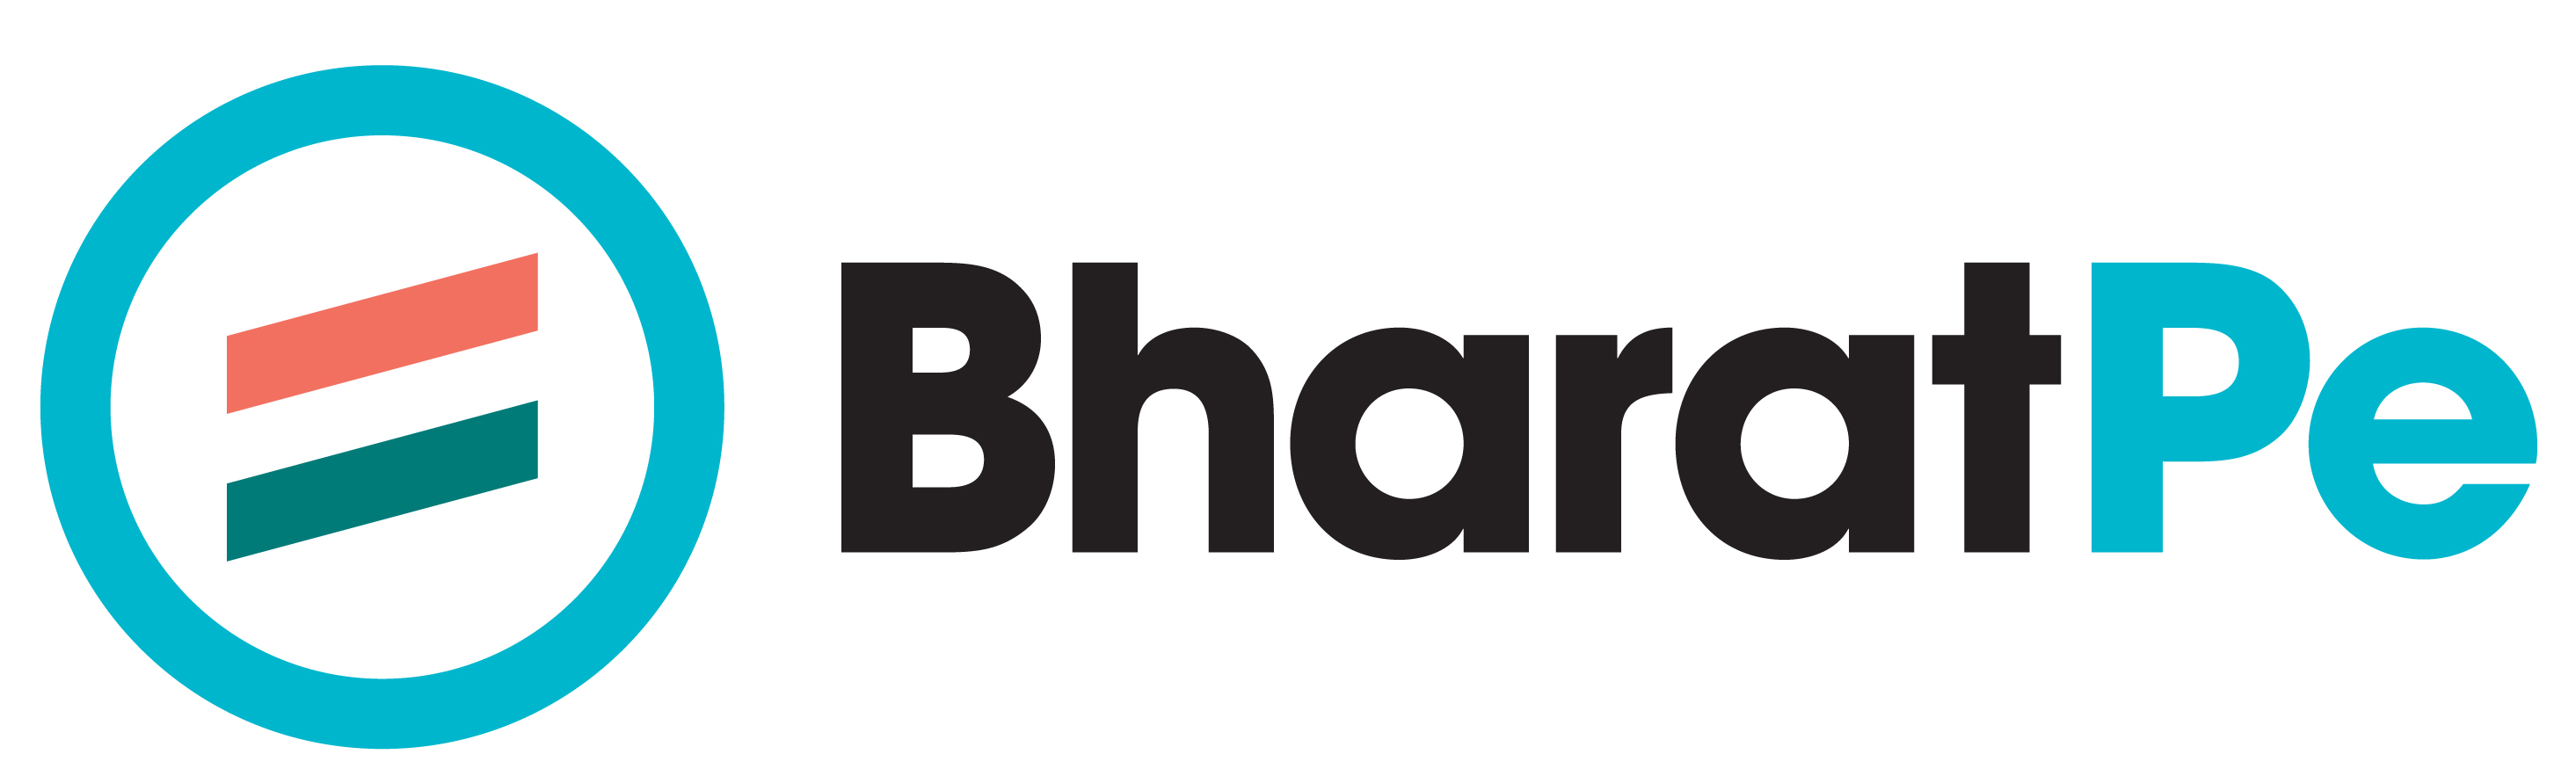 BharatPe announces massive expansion plans: Aims to scale up to 65 cities by December 2020 decoding=